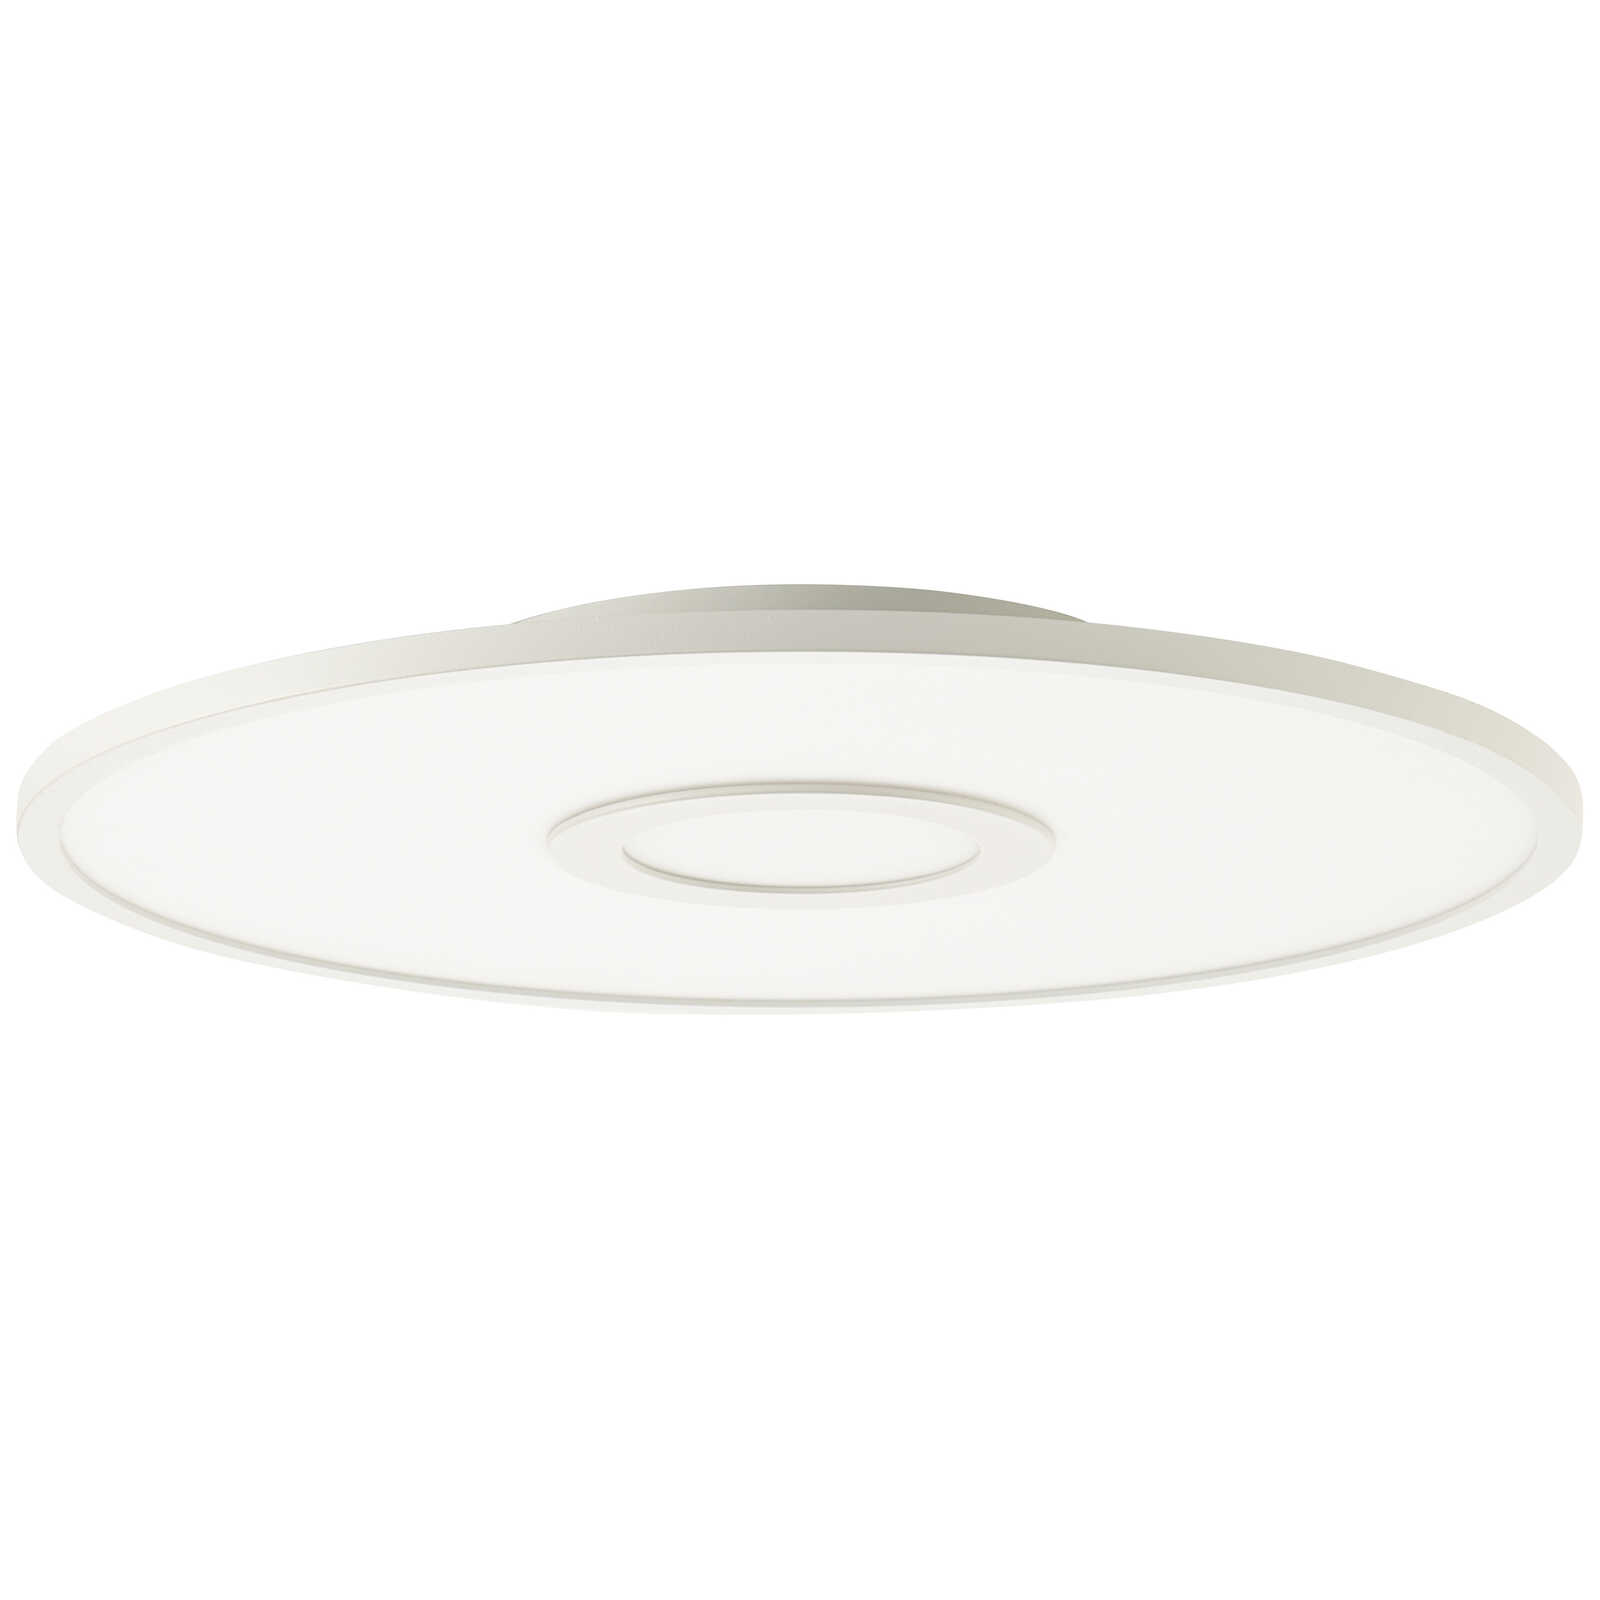             Metal ceiling light - Mads 1 - White
        